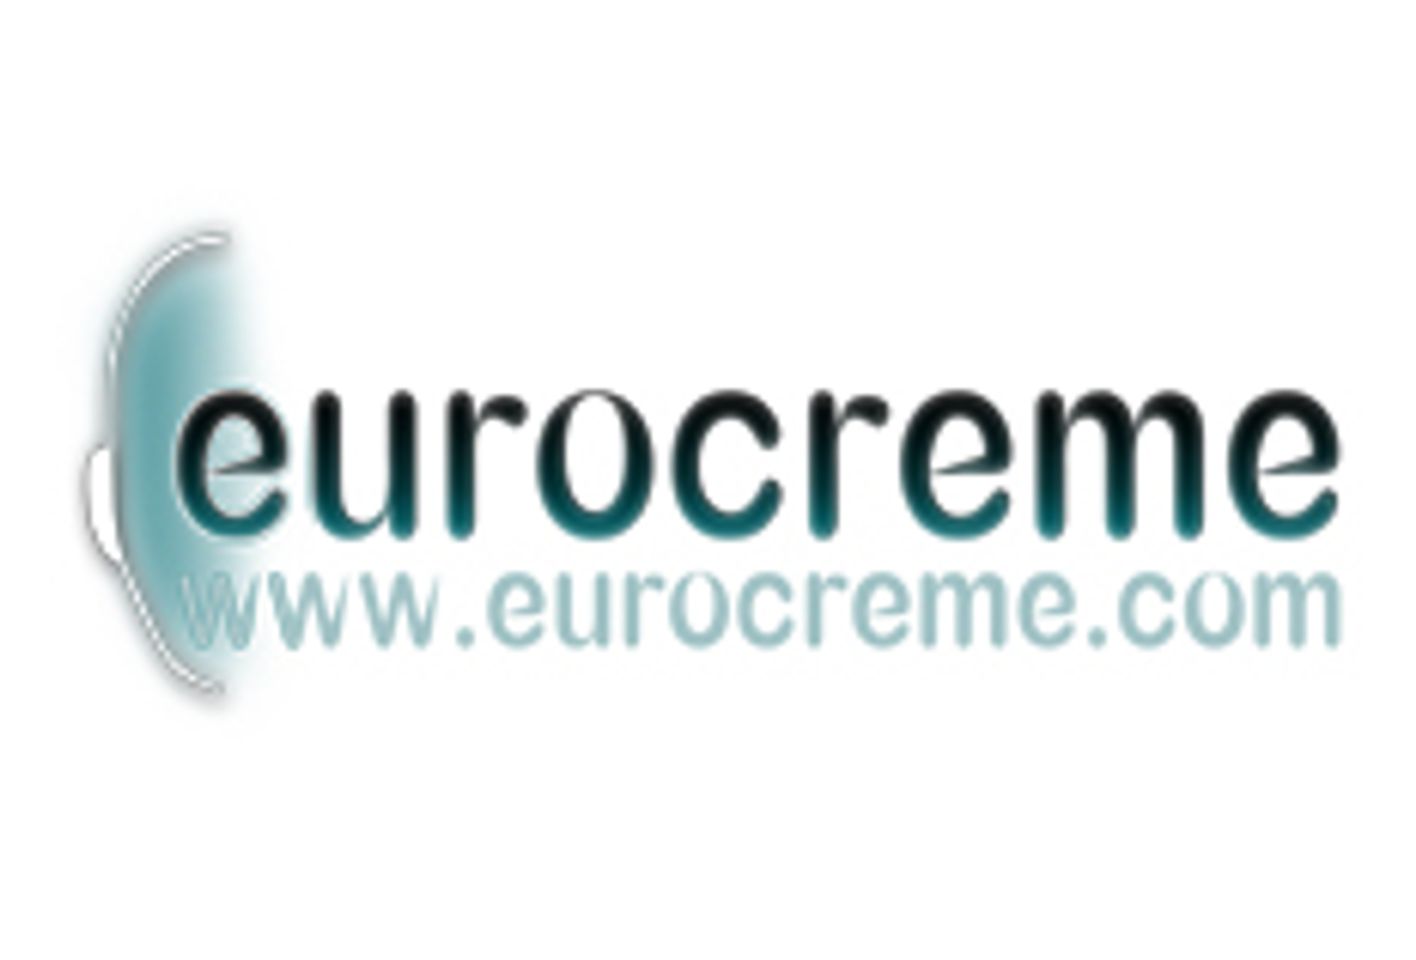 EurocremeStore.com Creates the Gift That Keeps on Giving